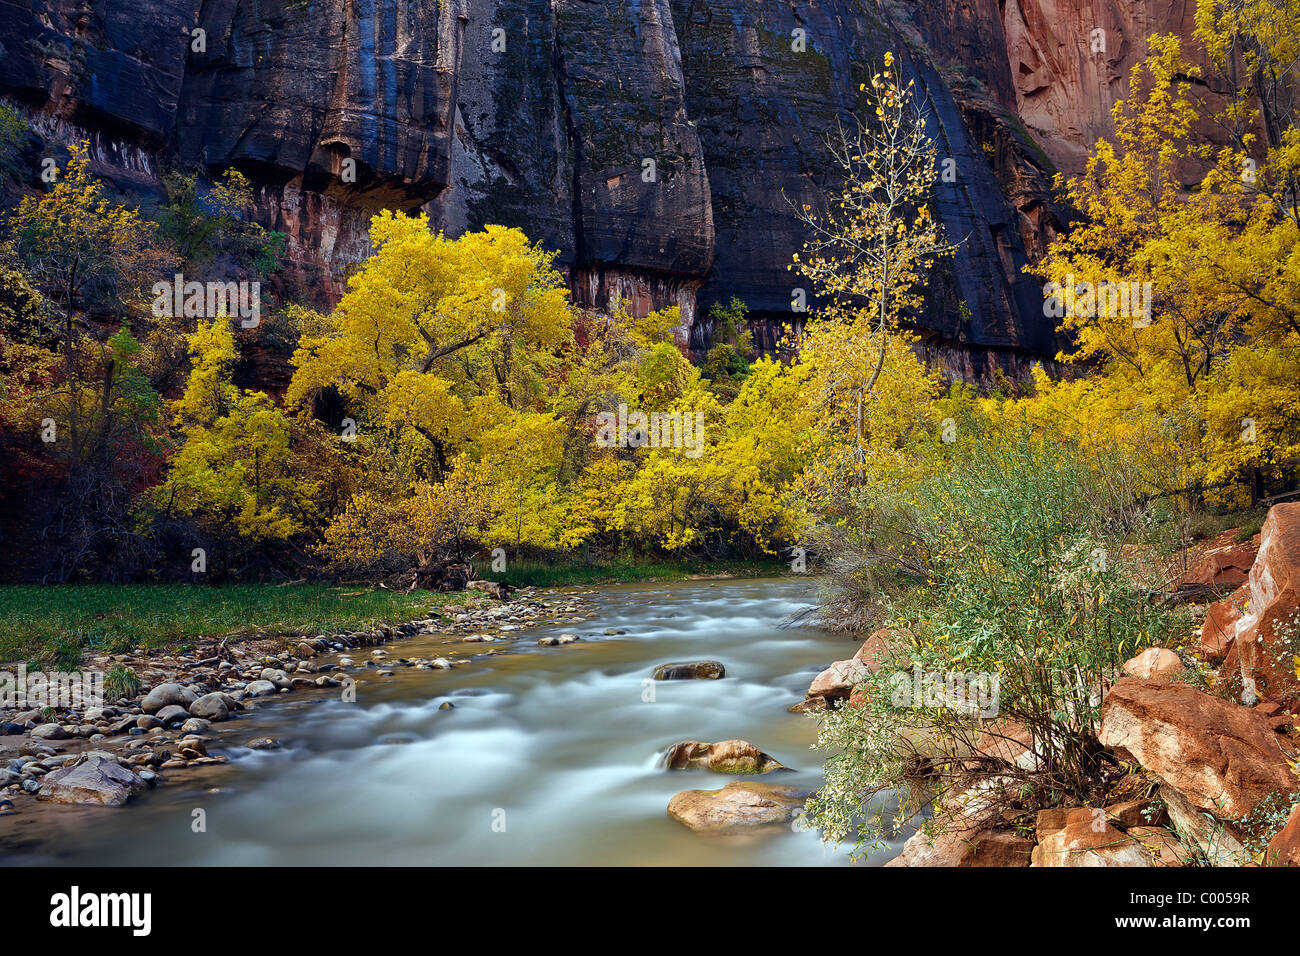 Cottonwood trees in peak fall color line the banks of the Virgin River in Zion Canyon, Zion National Park, Utah, USA. Stock Photo